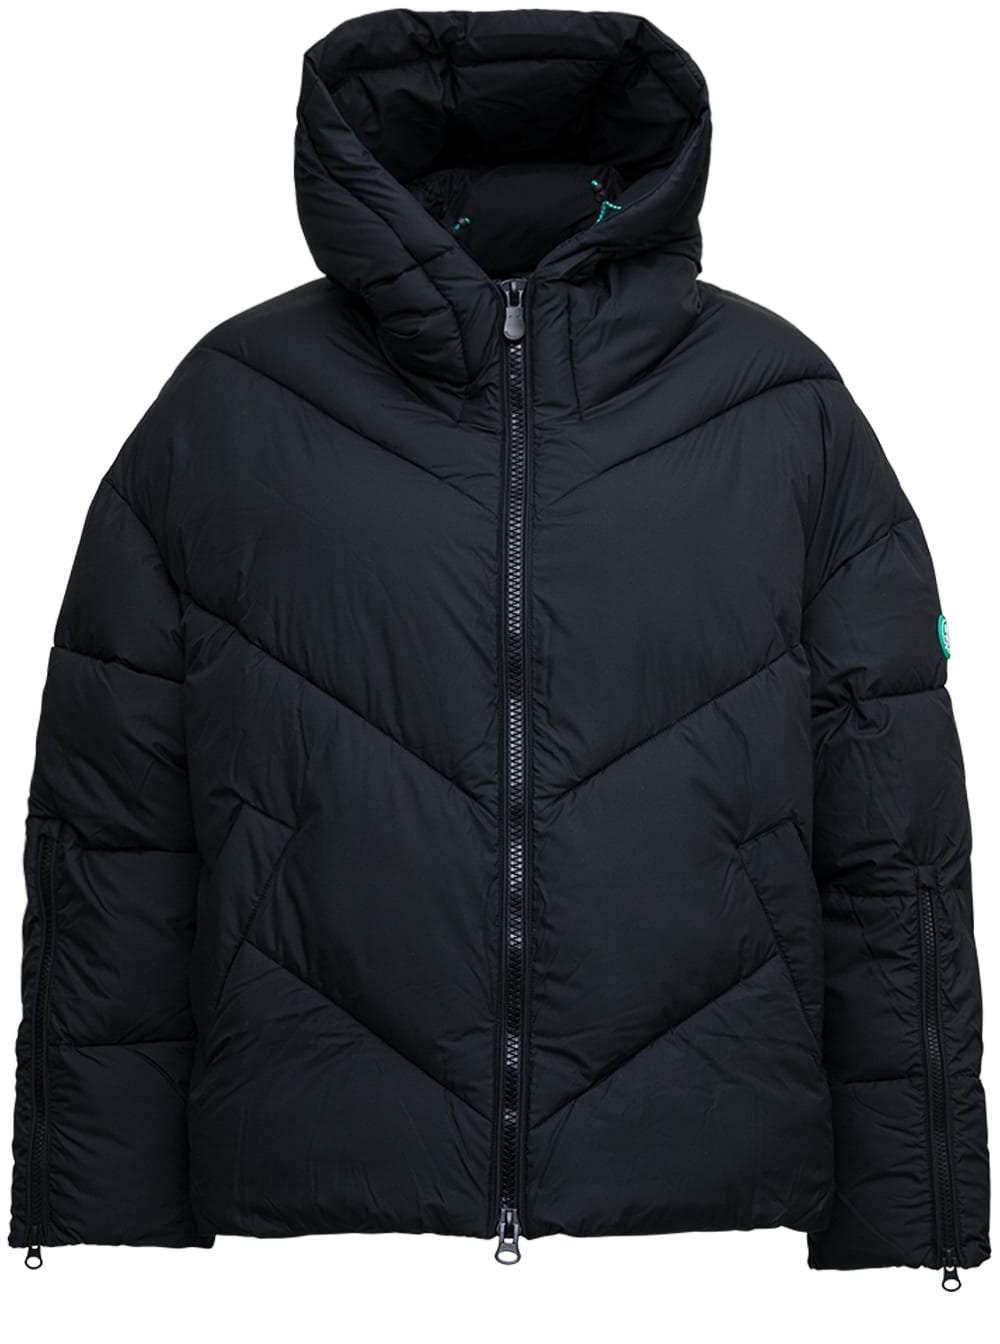 Save the Duck Black Quilted Nylon Down Jacket